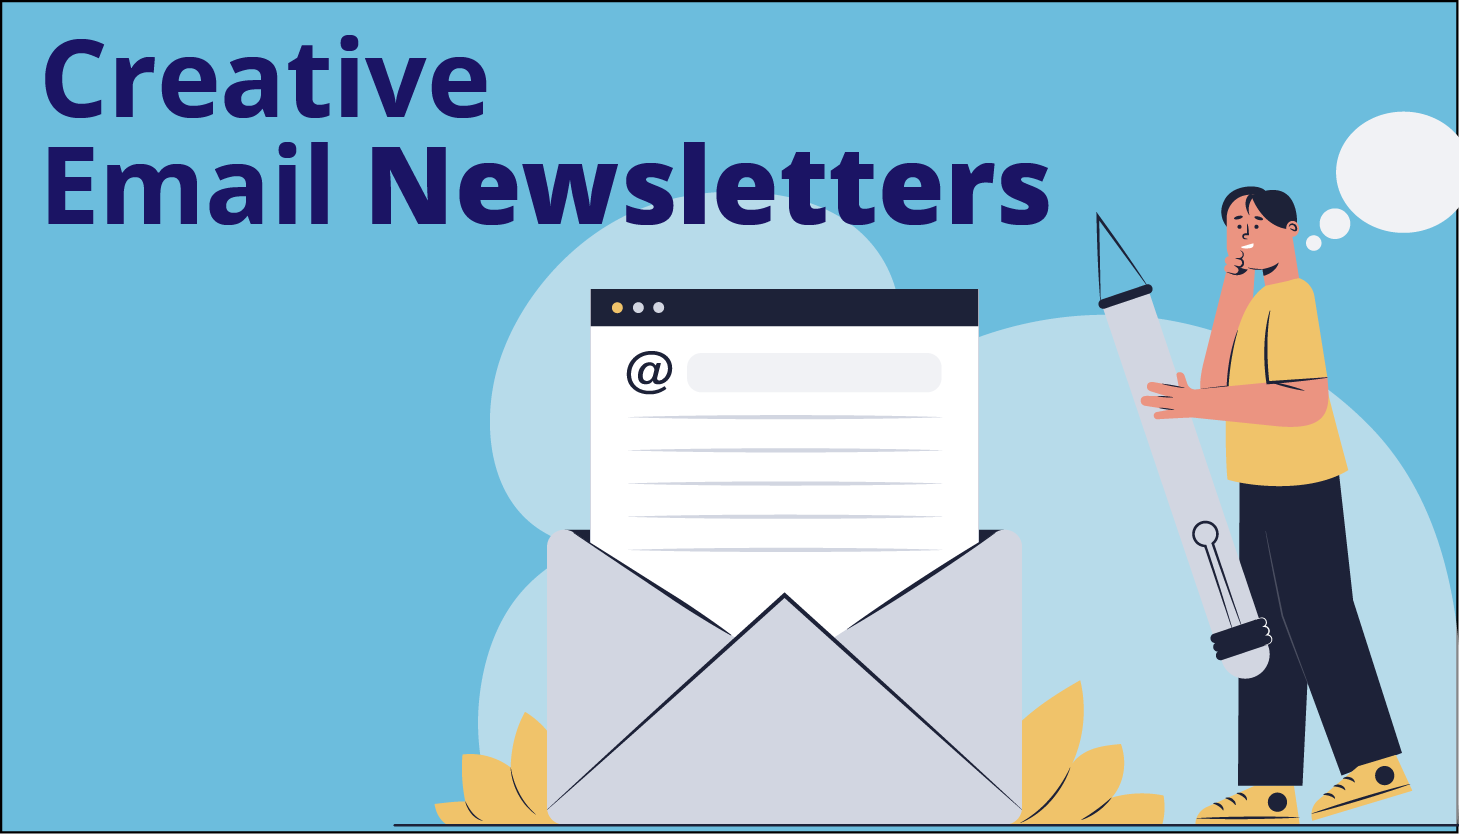  11 Tips to Build Most Creative Email Newsletter